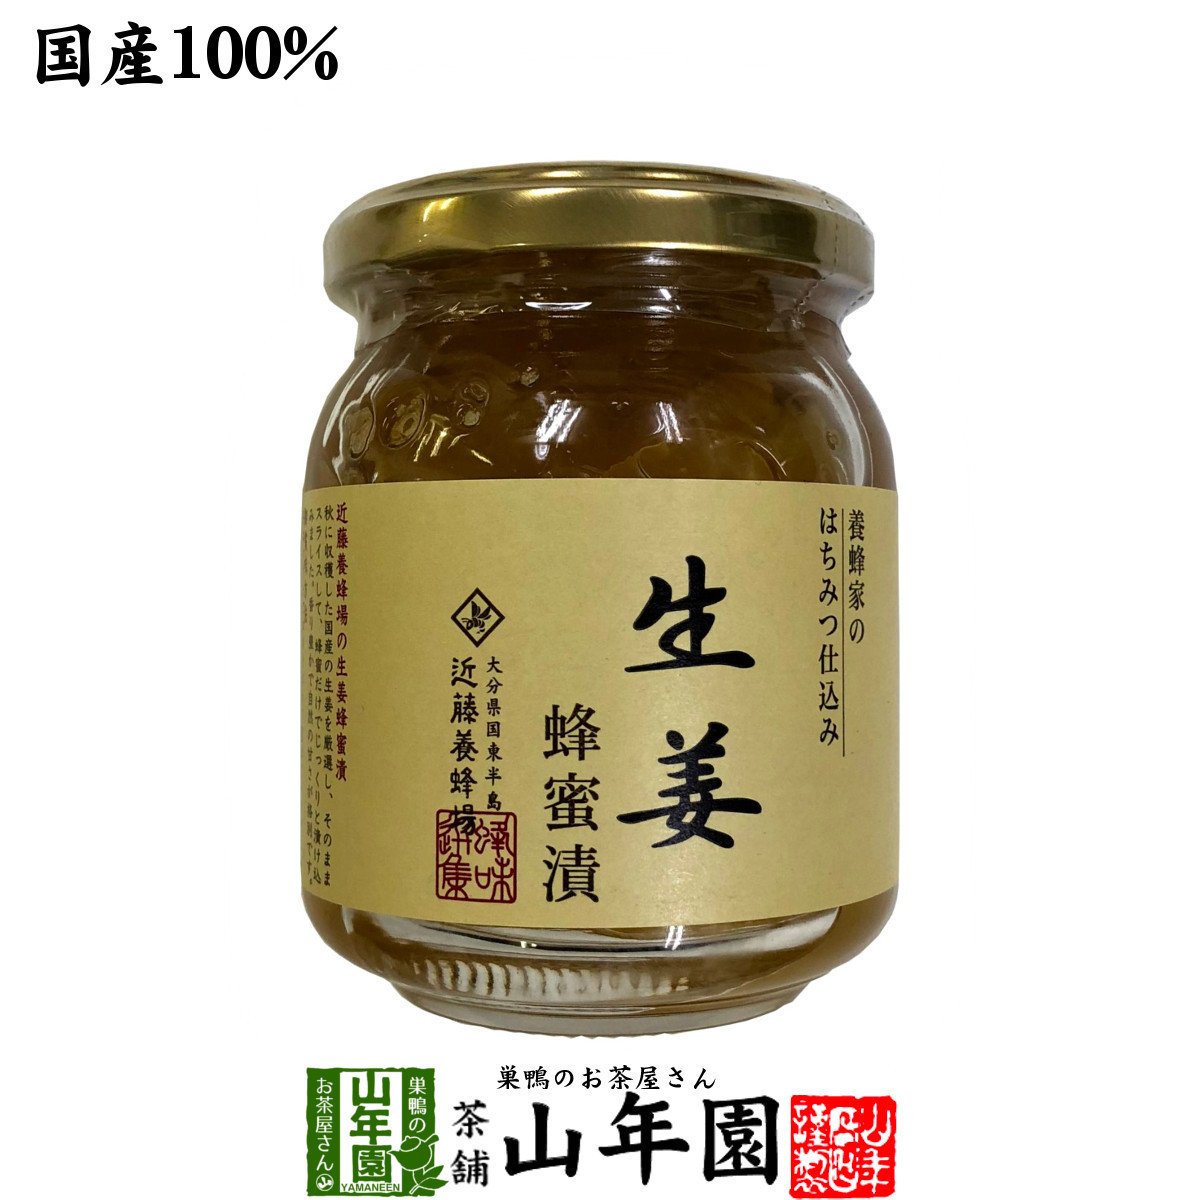  health food domestic production raw .. bee house. honey . included raw . bee molasses ..280g free shipping 